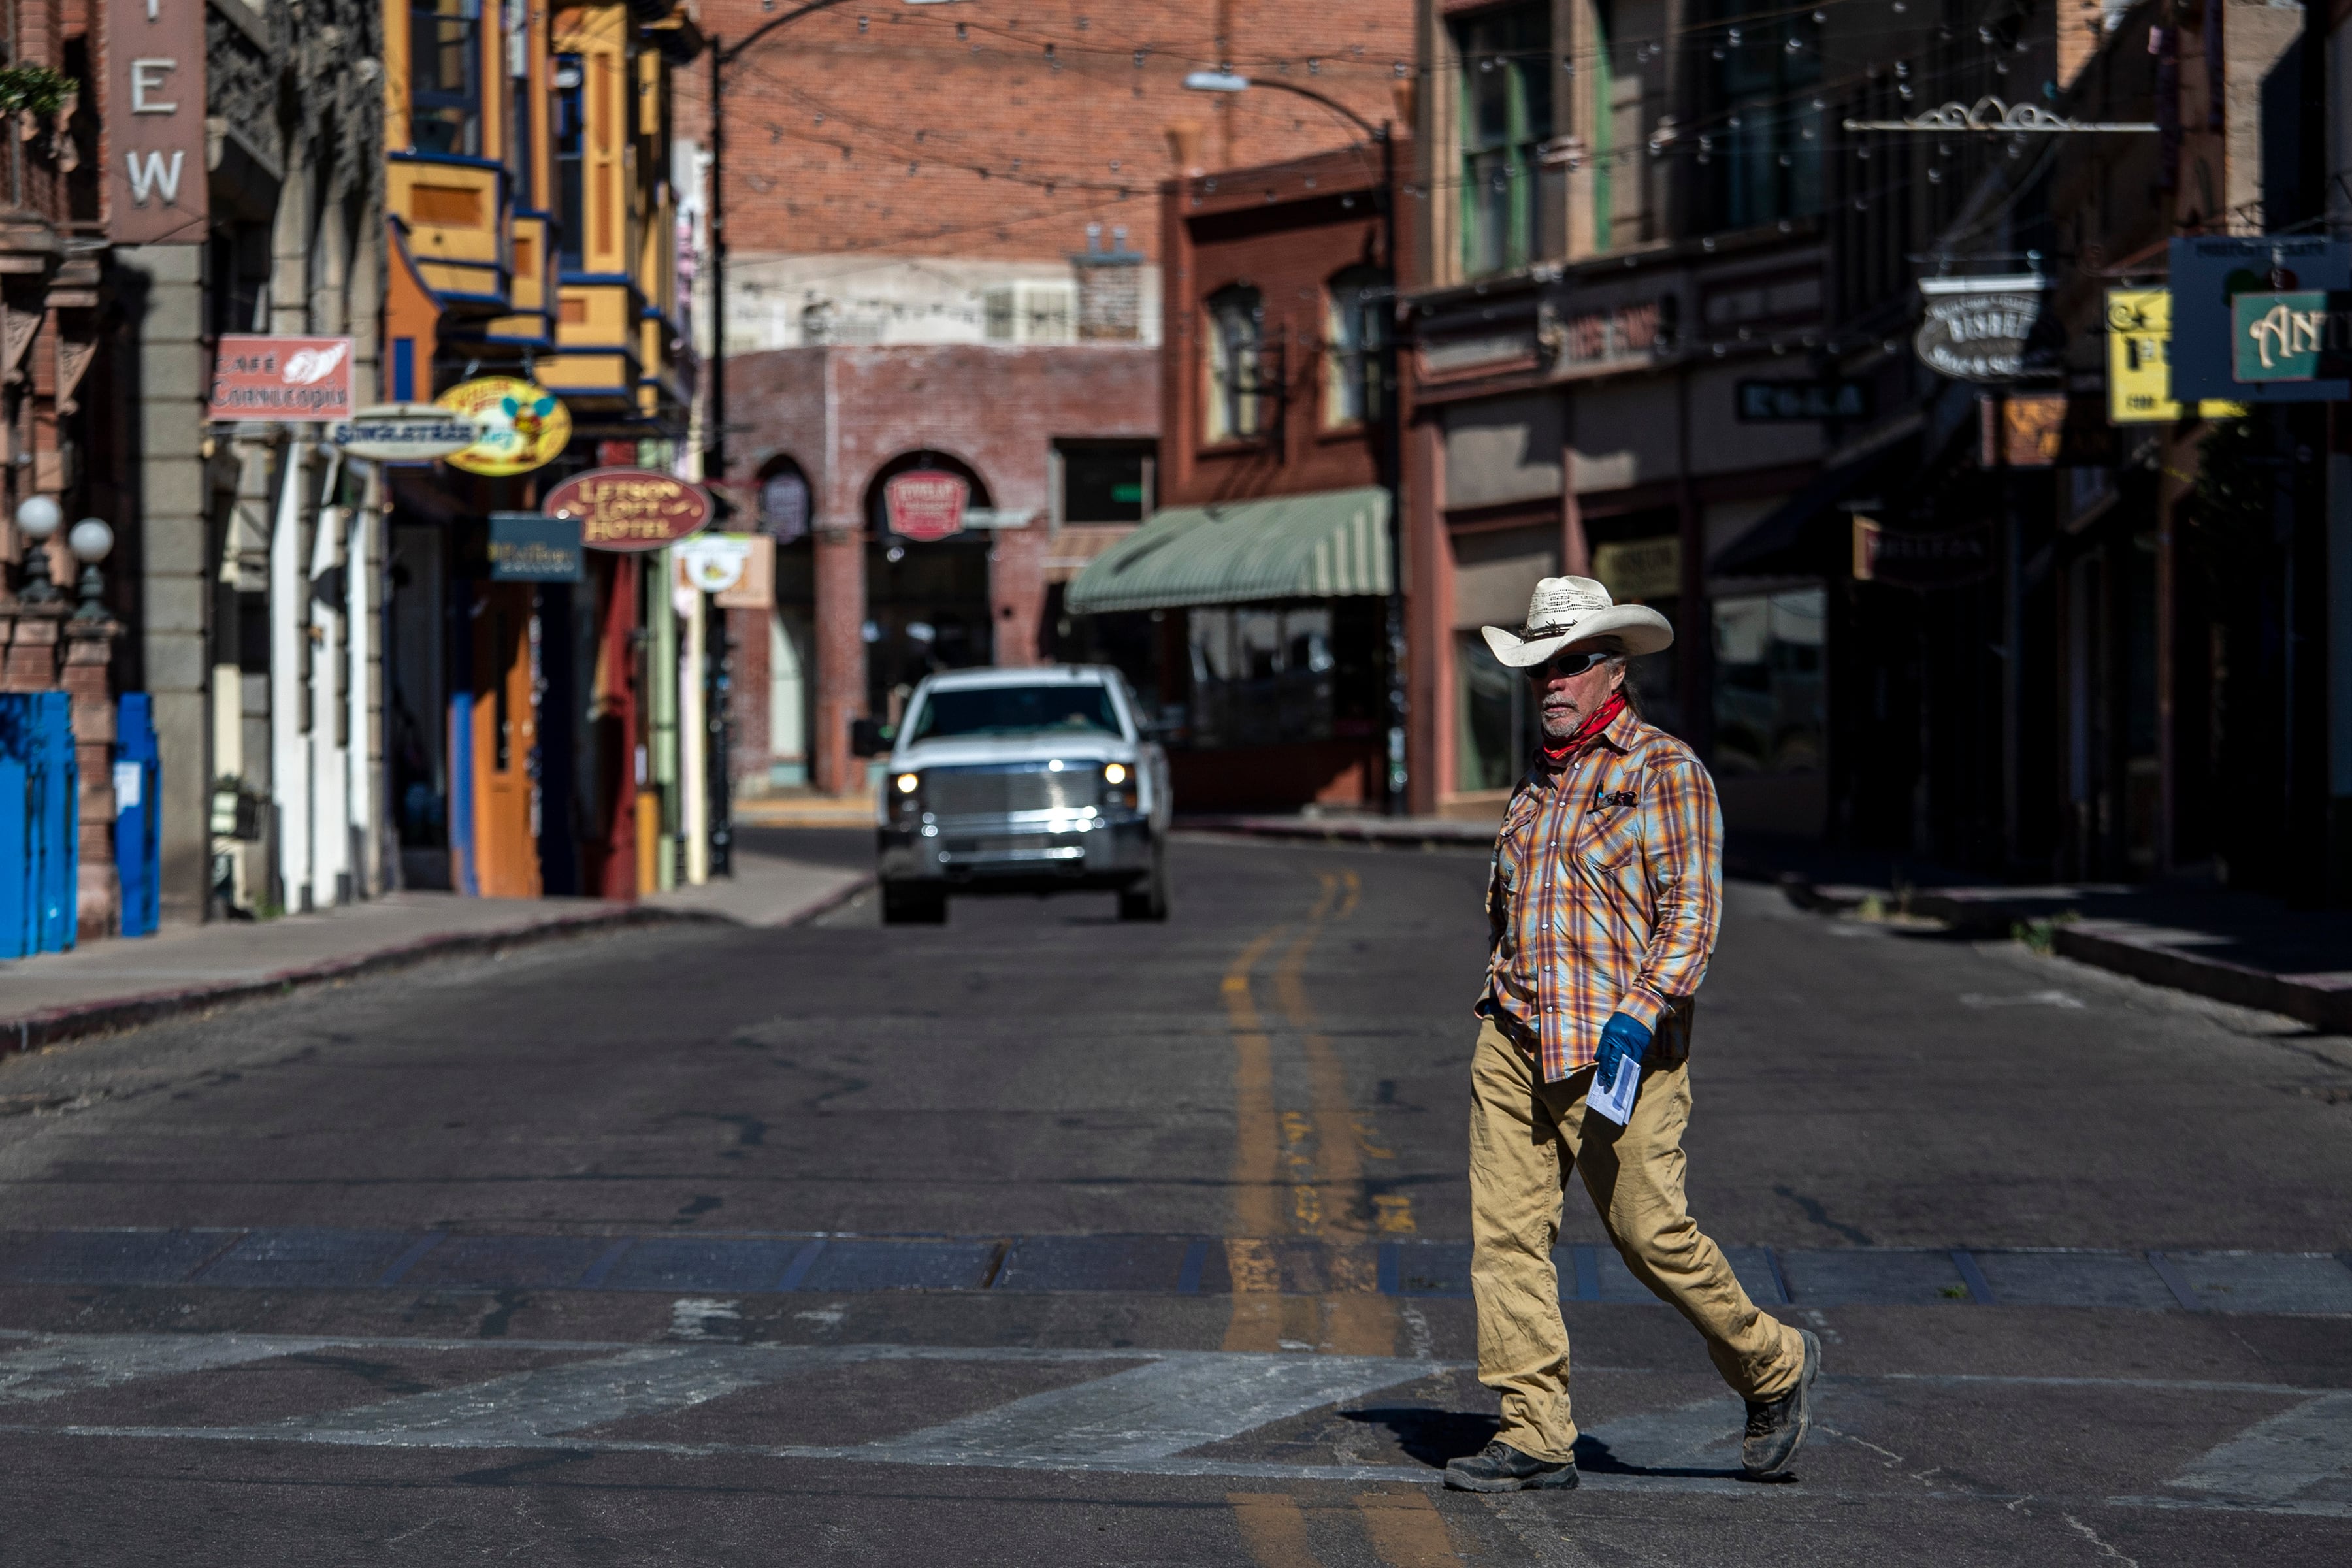 A man in a cowboy hat crosses a street lined by old buildings